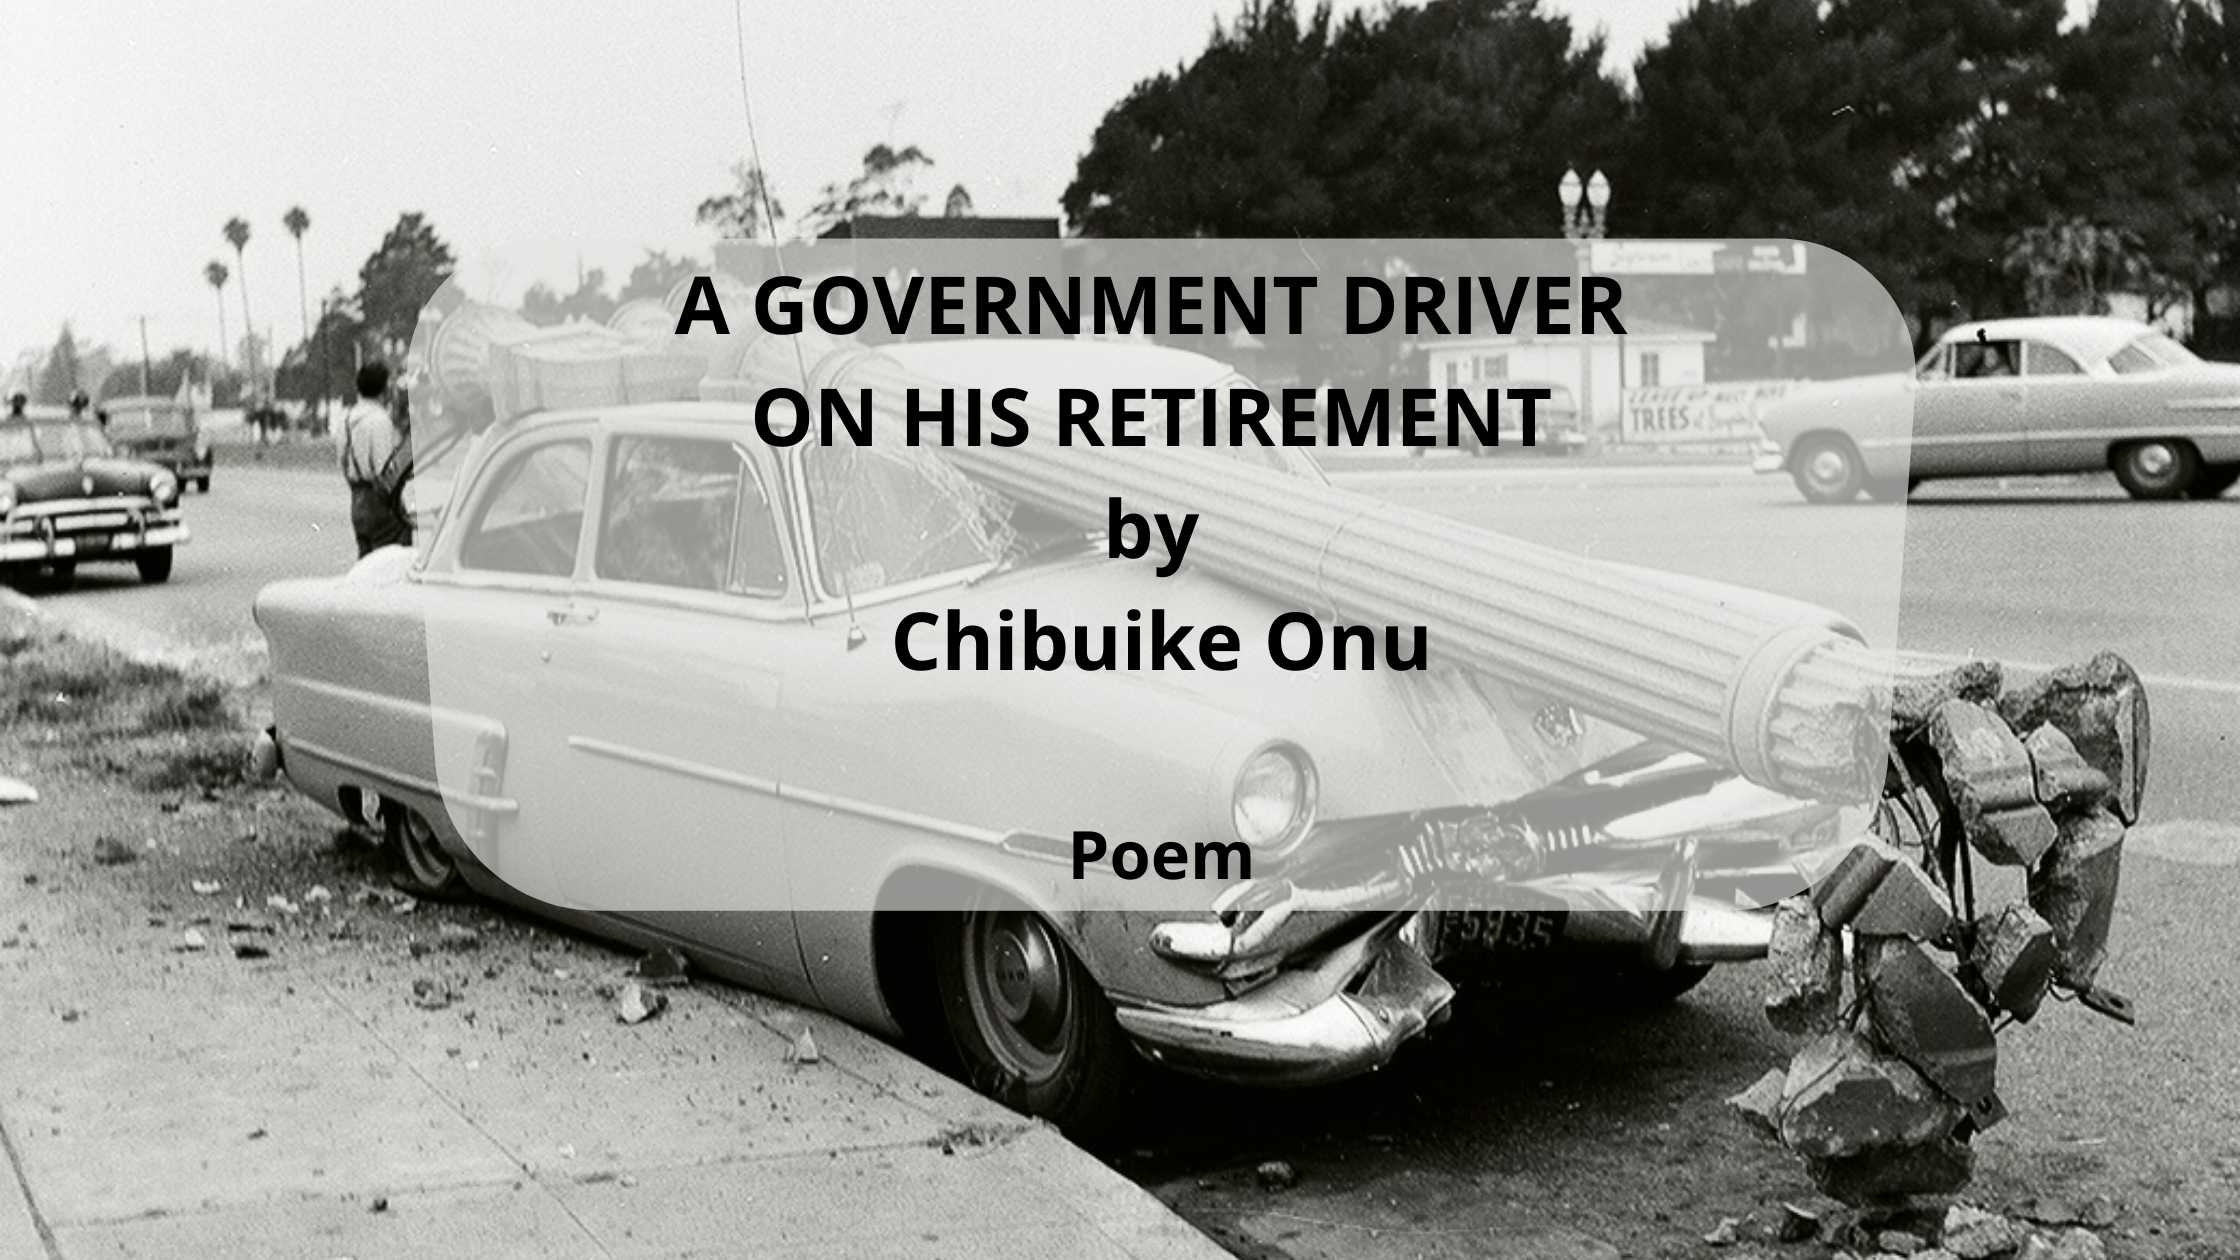 A GOVERNMENT DRIVER ON HIS RETIREMENT by Chibuike Onu Poem